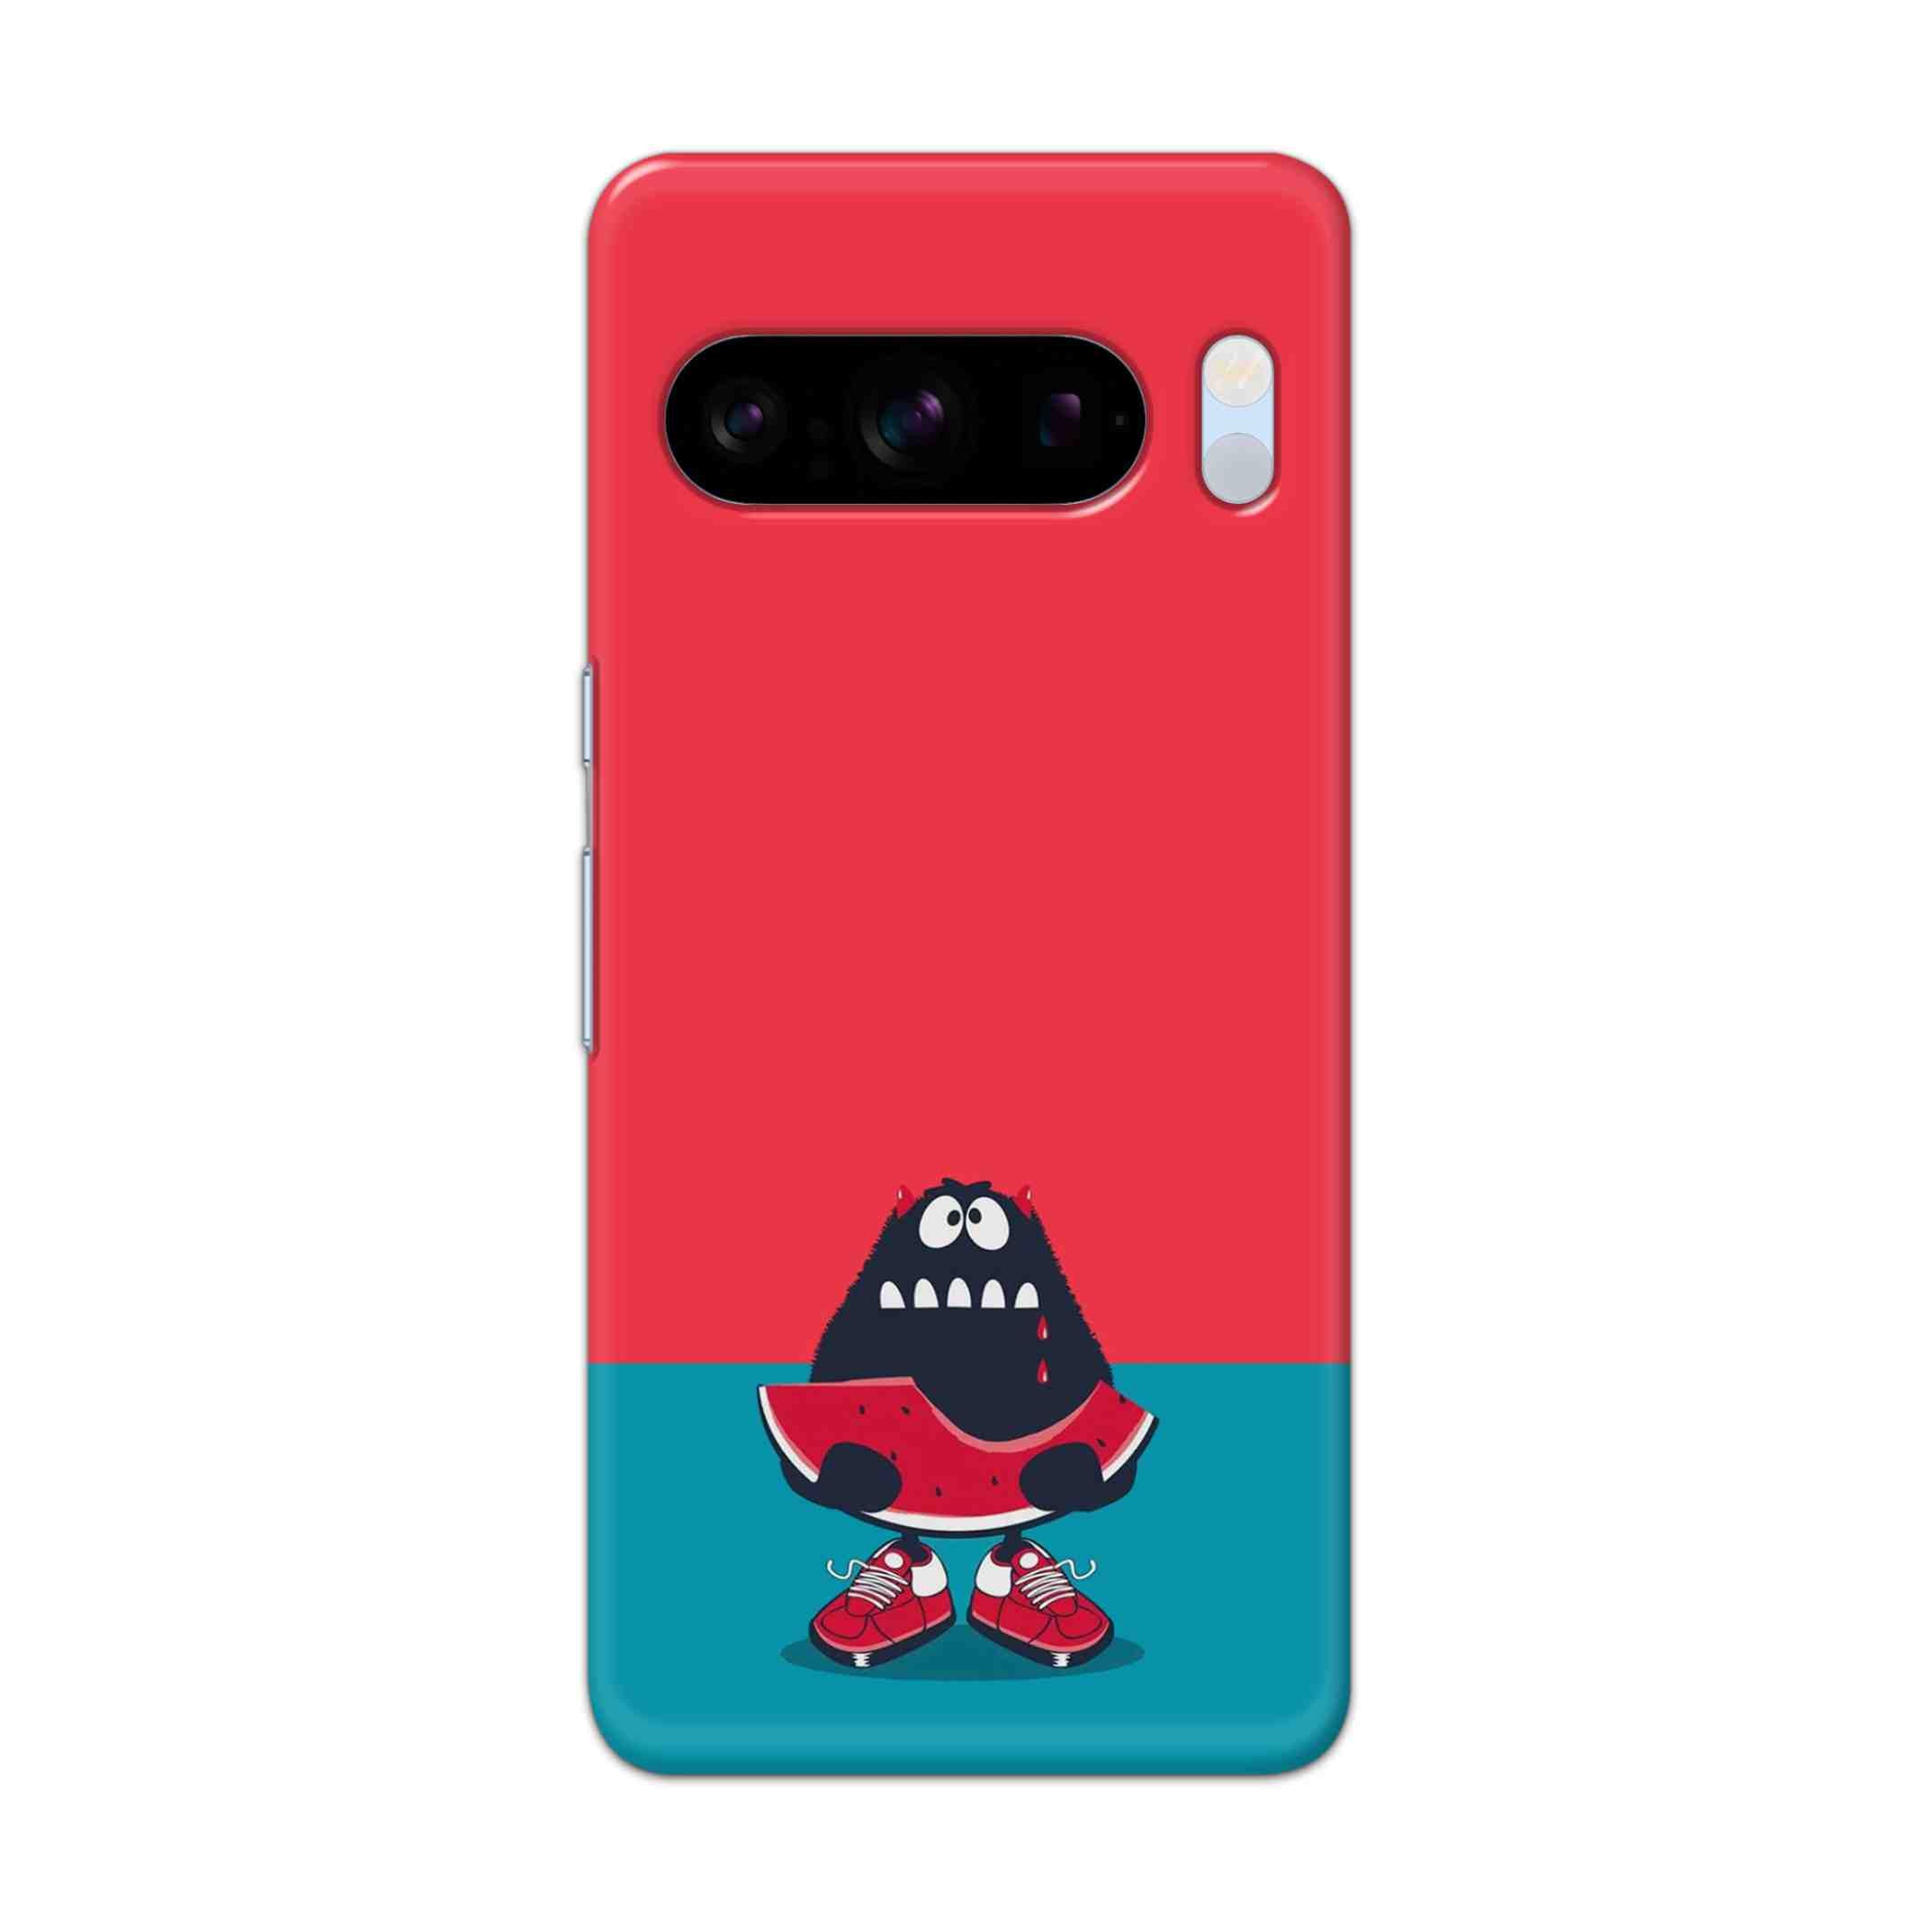 Buy Watermellon Hard Back Mobile Phone Case/Cover For Pixel 8 Pro Online